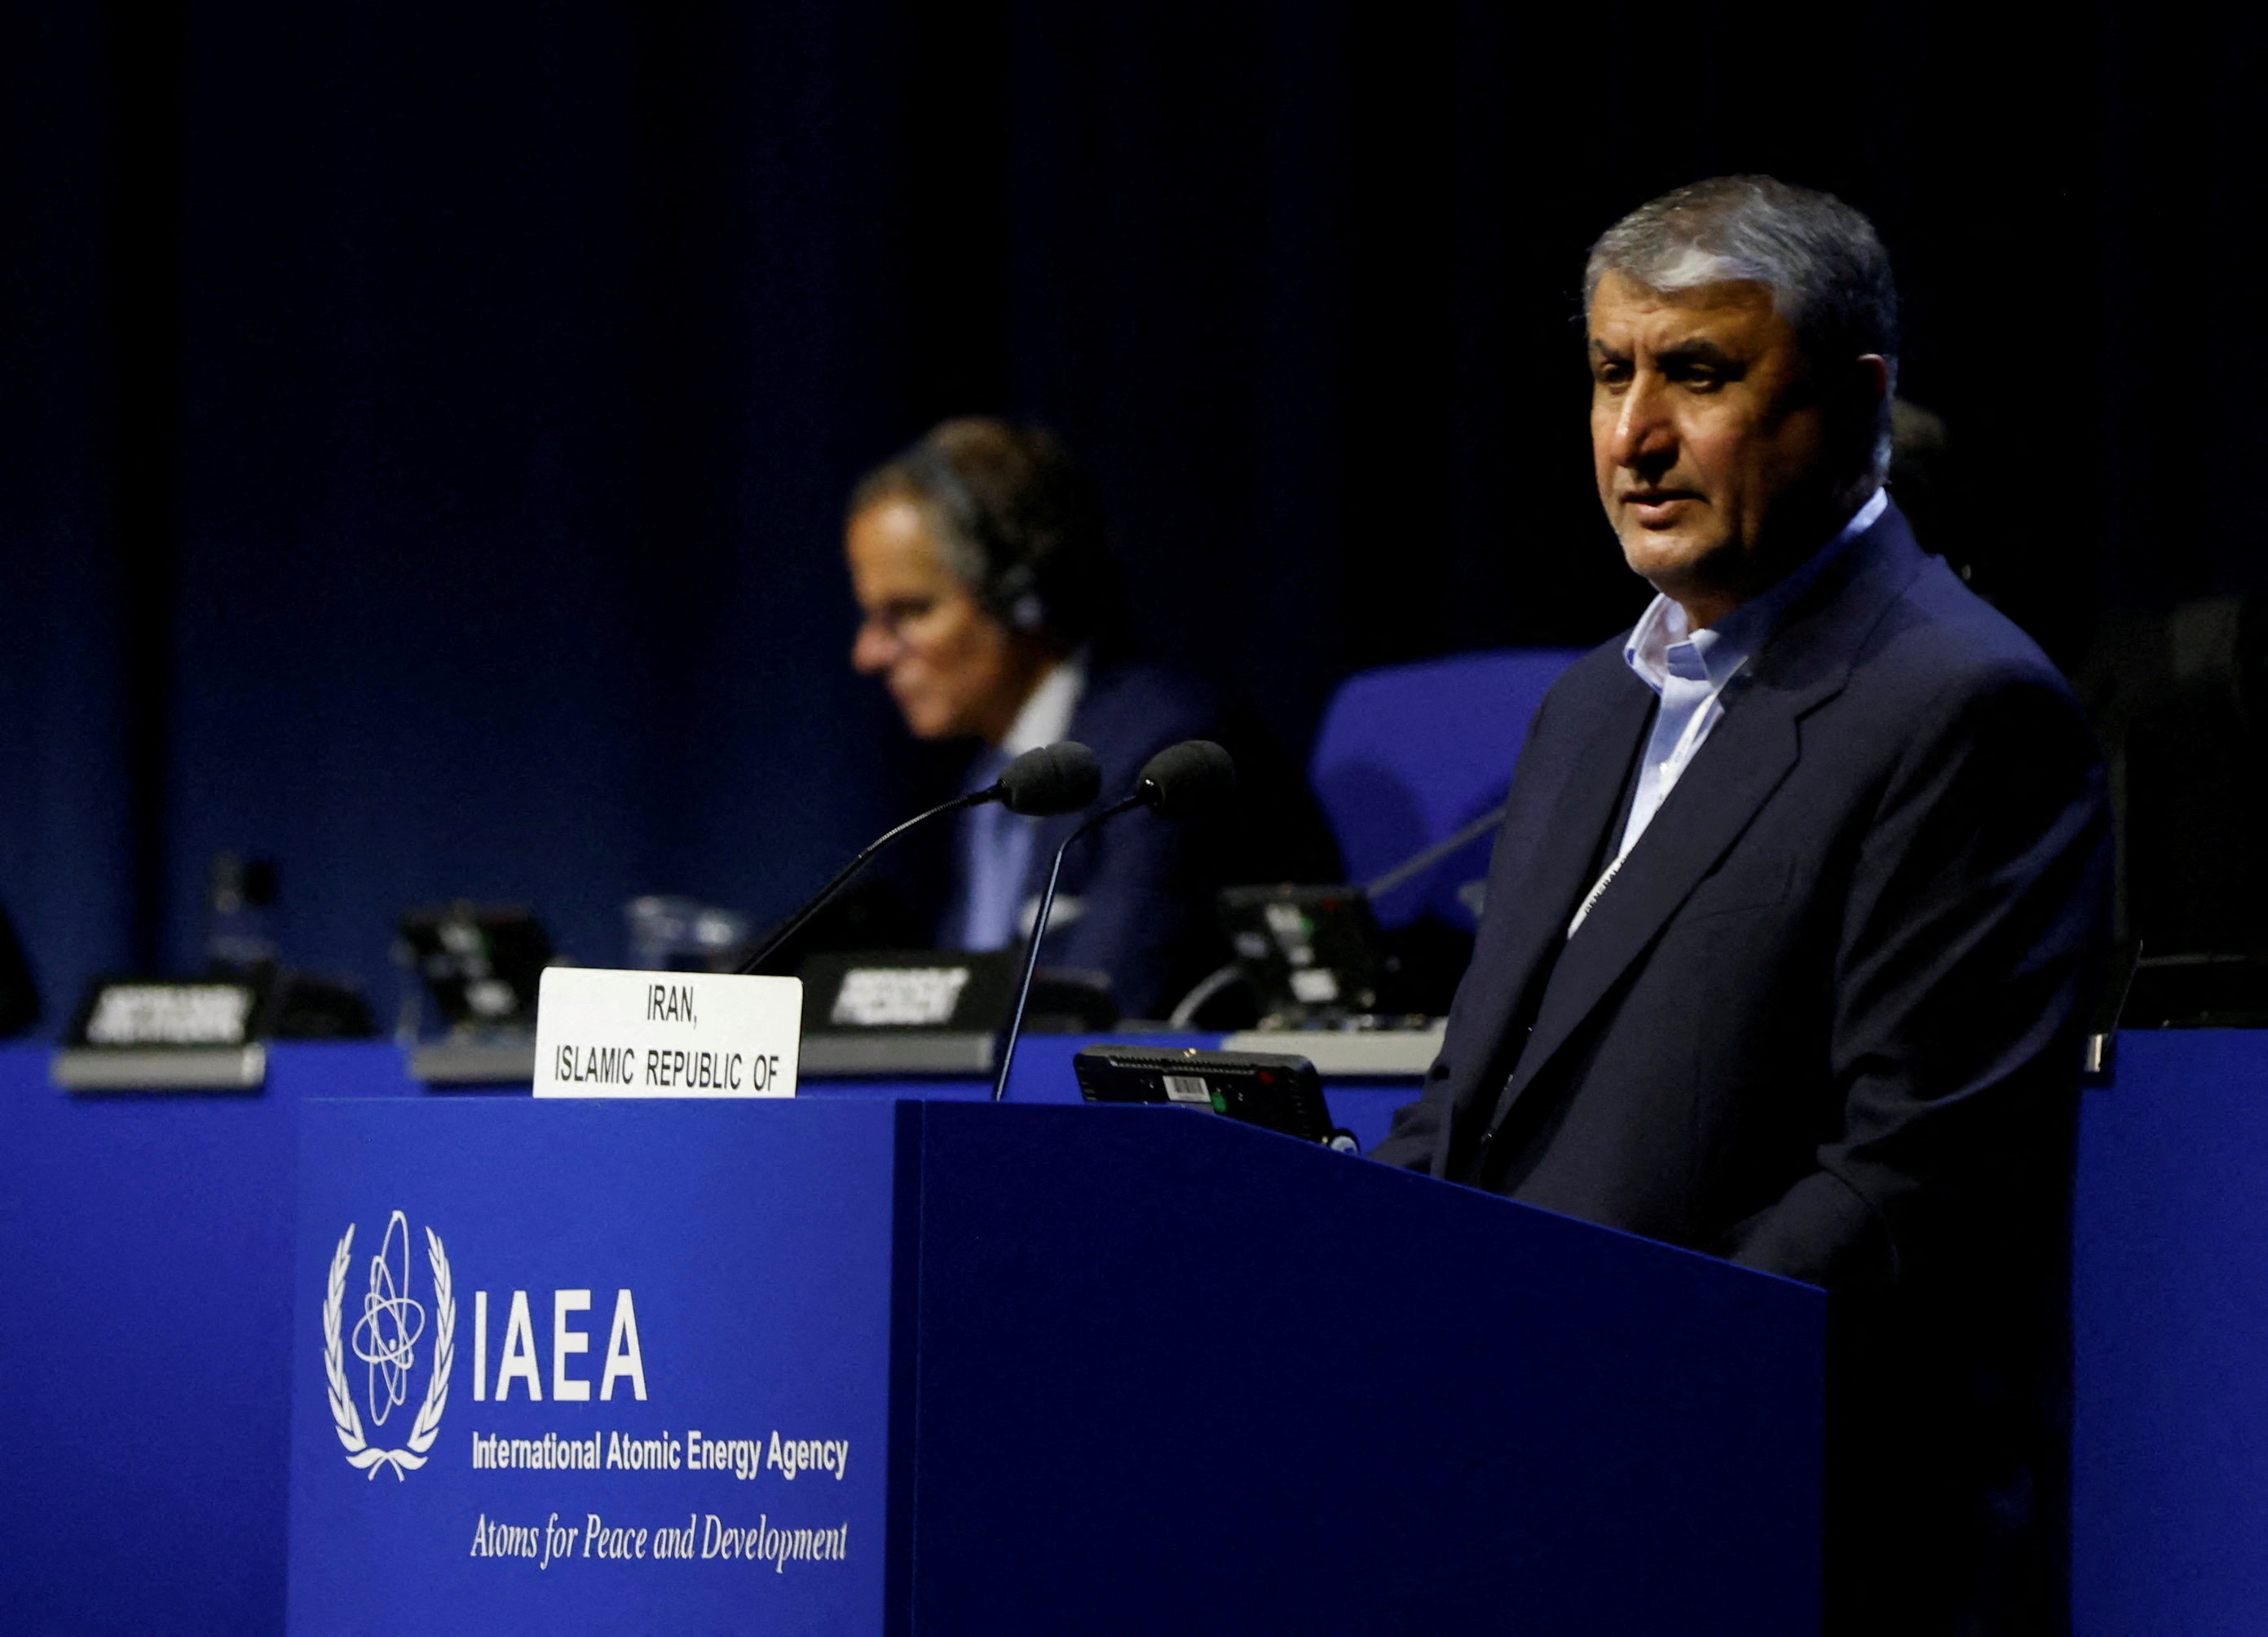 Opening session of the IAEA General Conference in Vienna